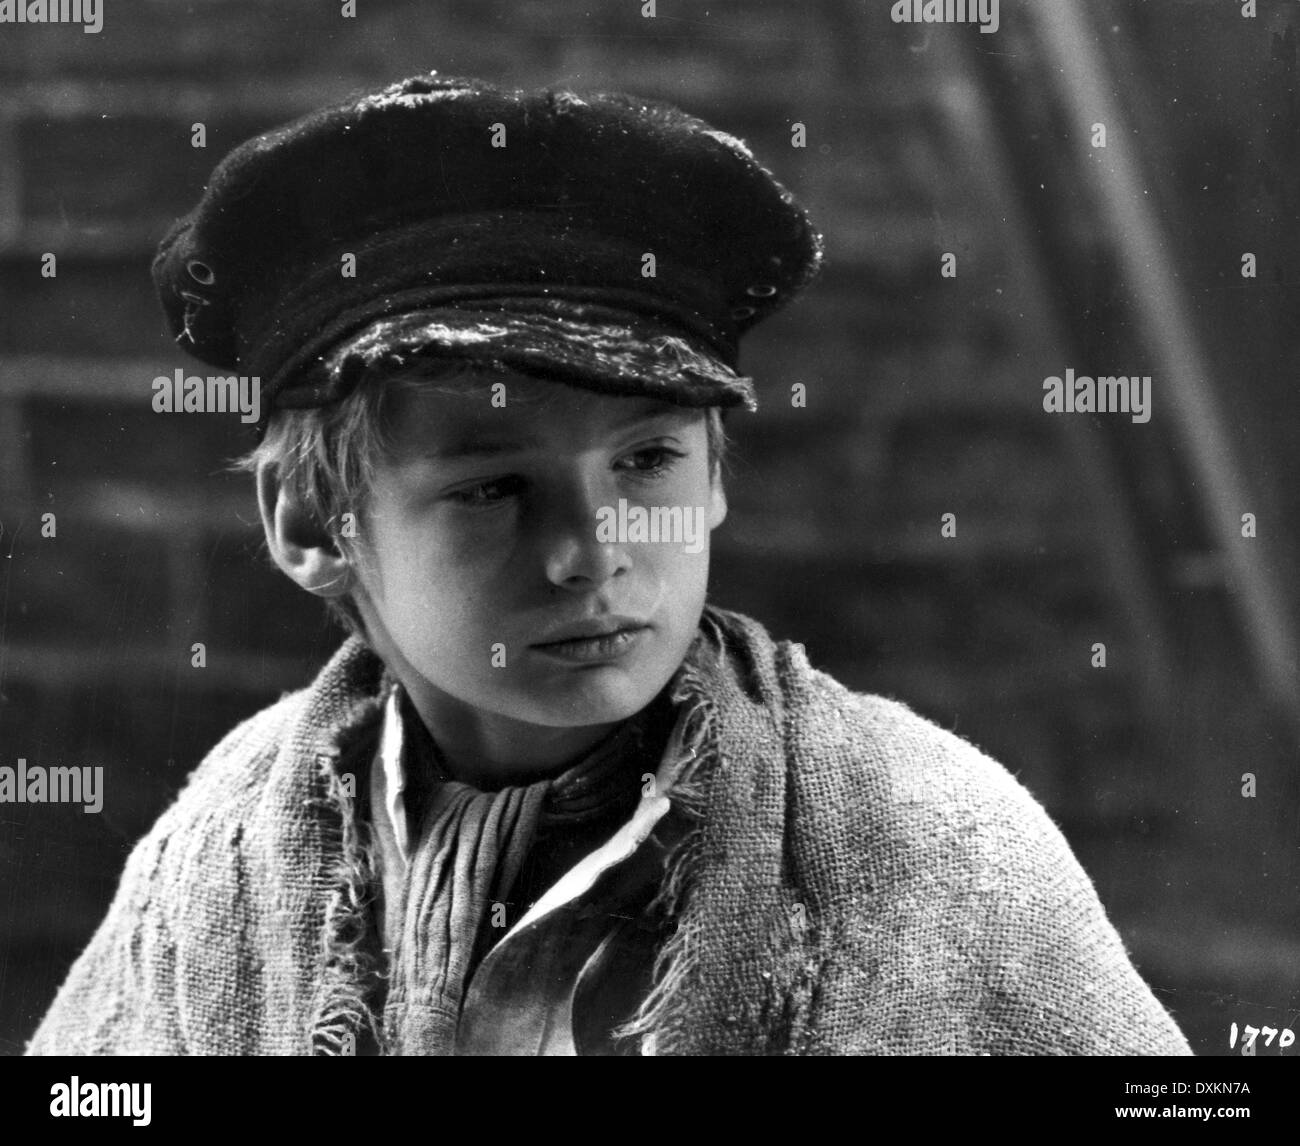 Oliver mark Black and White Stock Photos & Images - Alamy